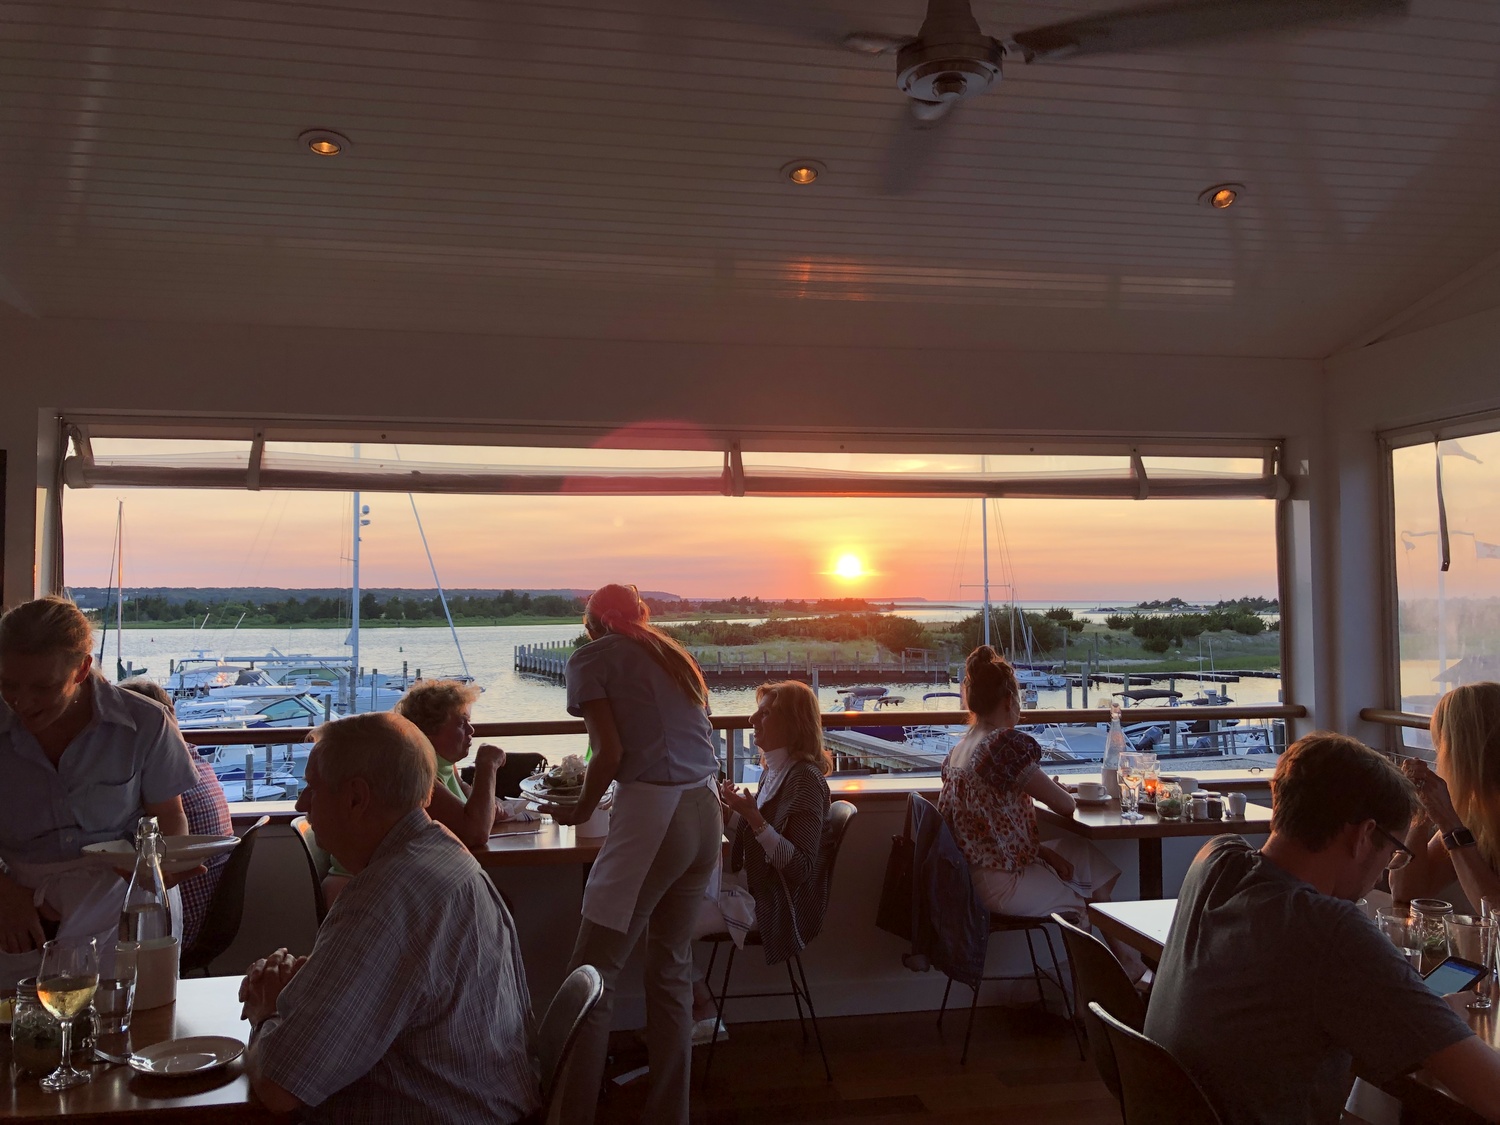 The sunset view at Bostwick's on the Harbor. COURTESY BOSTWICK'S ON THE HARBOR